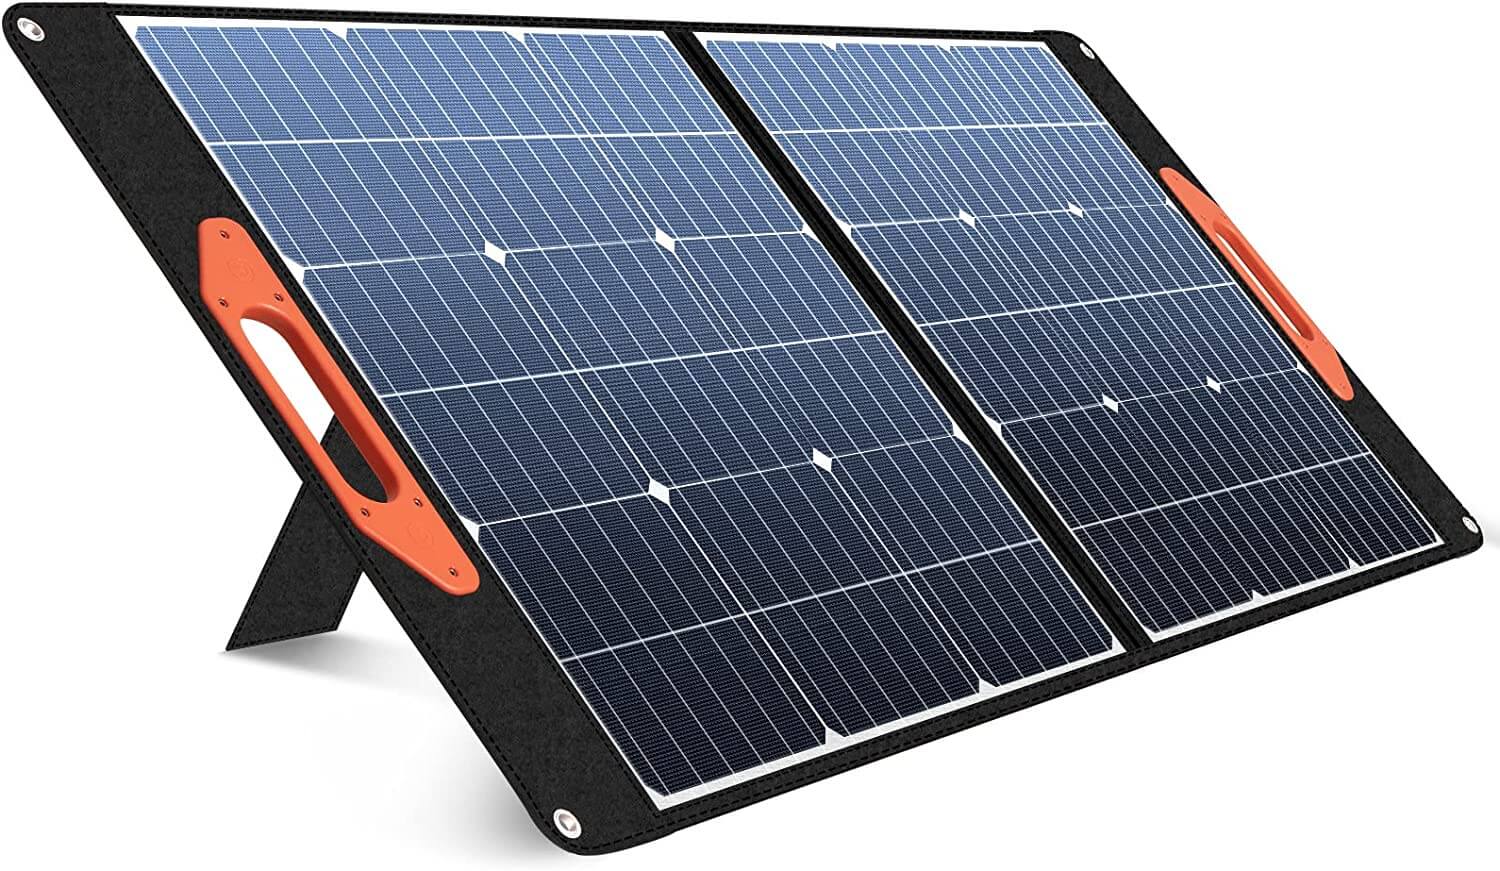 BLAVOR 100W Solar Panels PD 45W Fast Charger QC3.0 Solar Battery Charger - Blavor